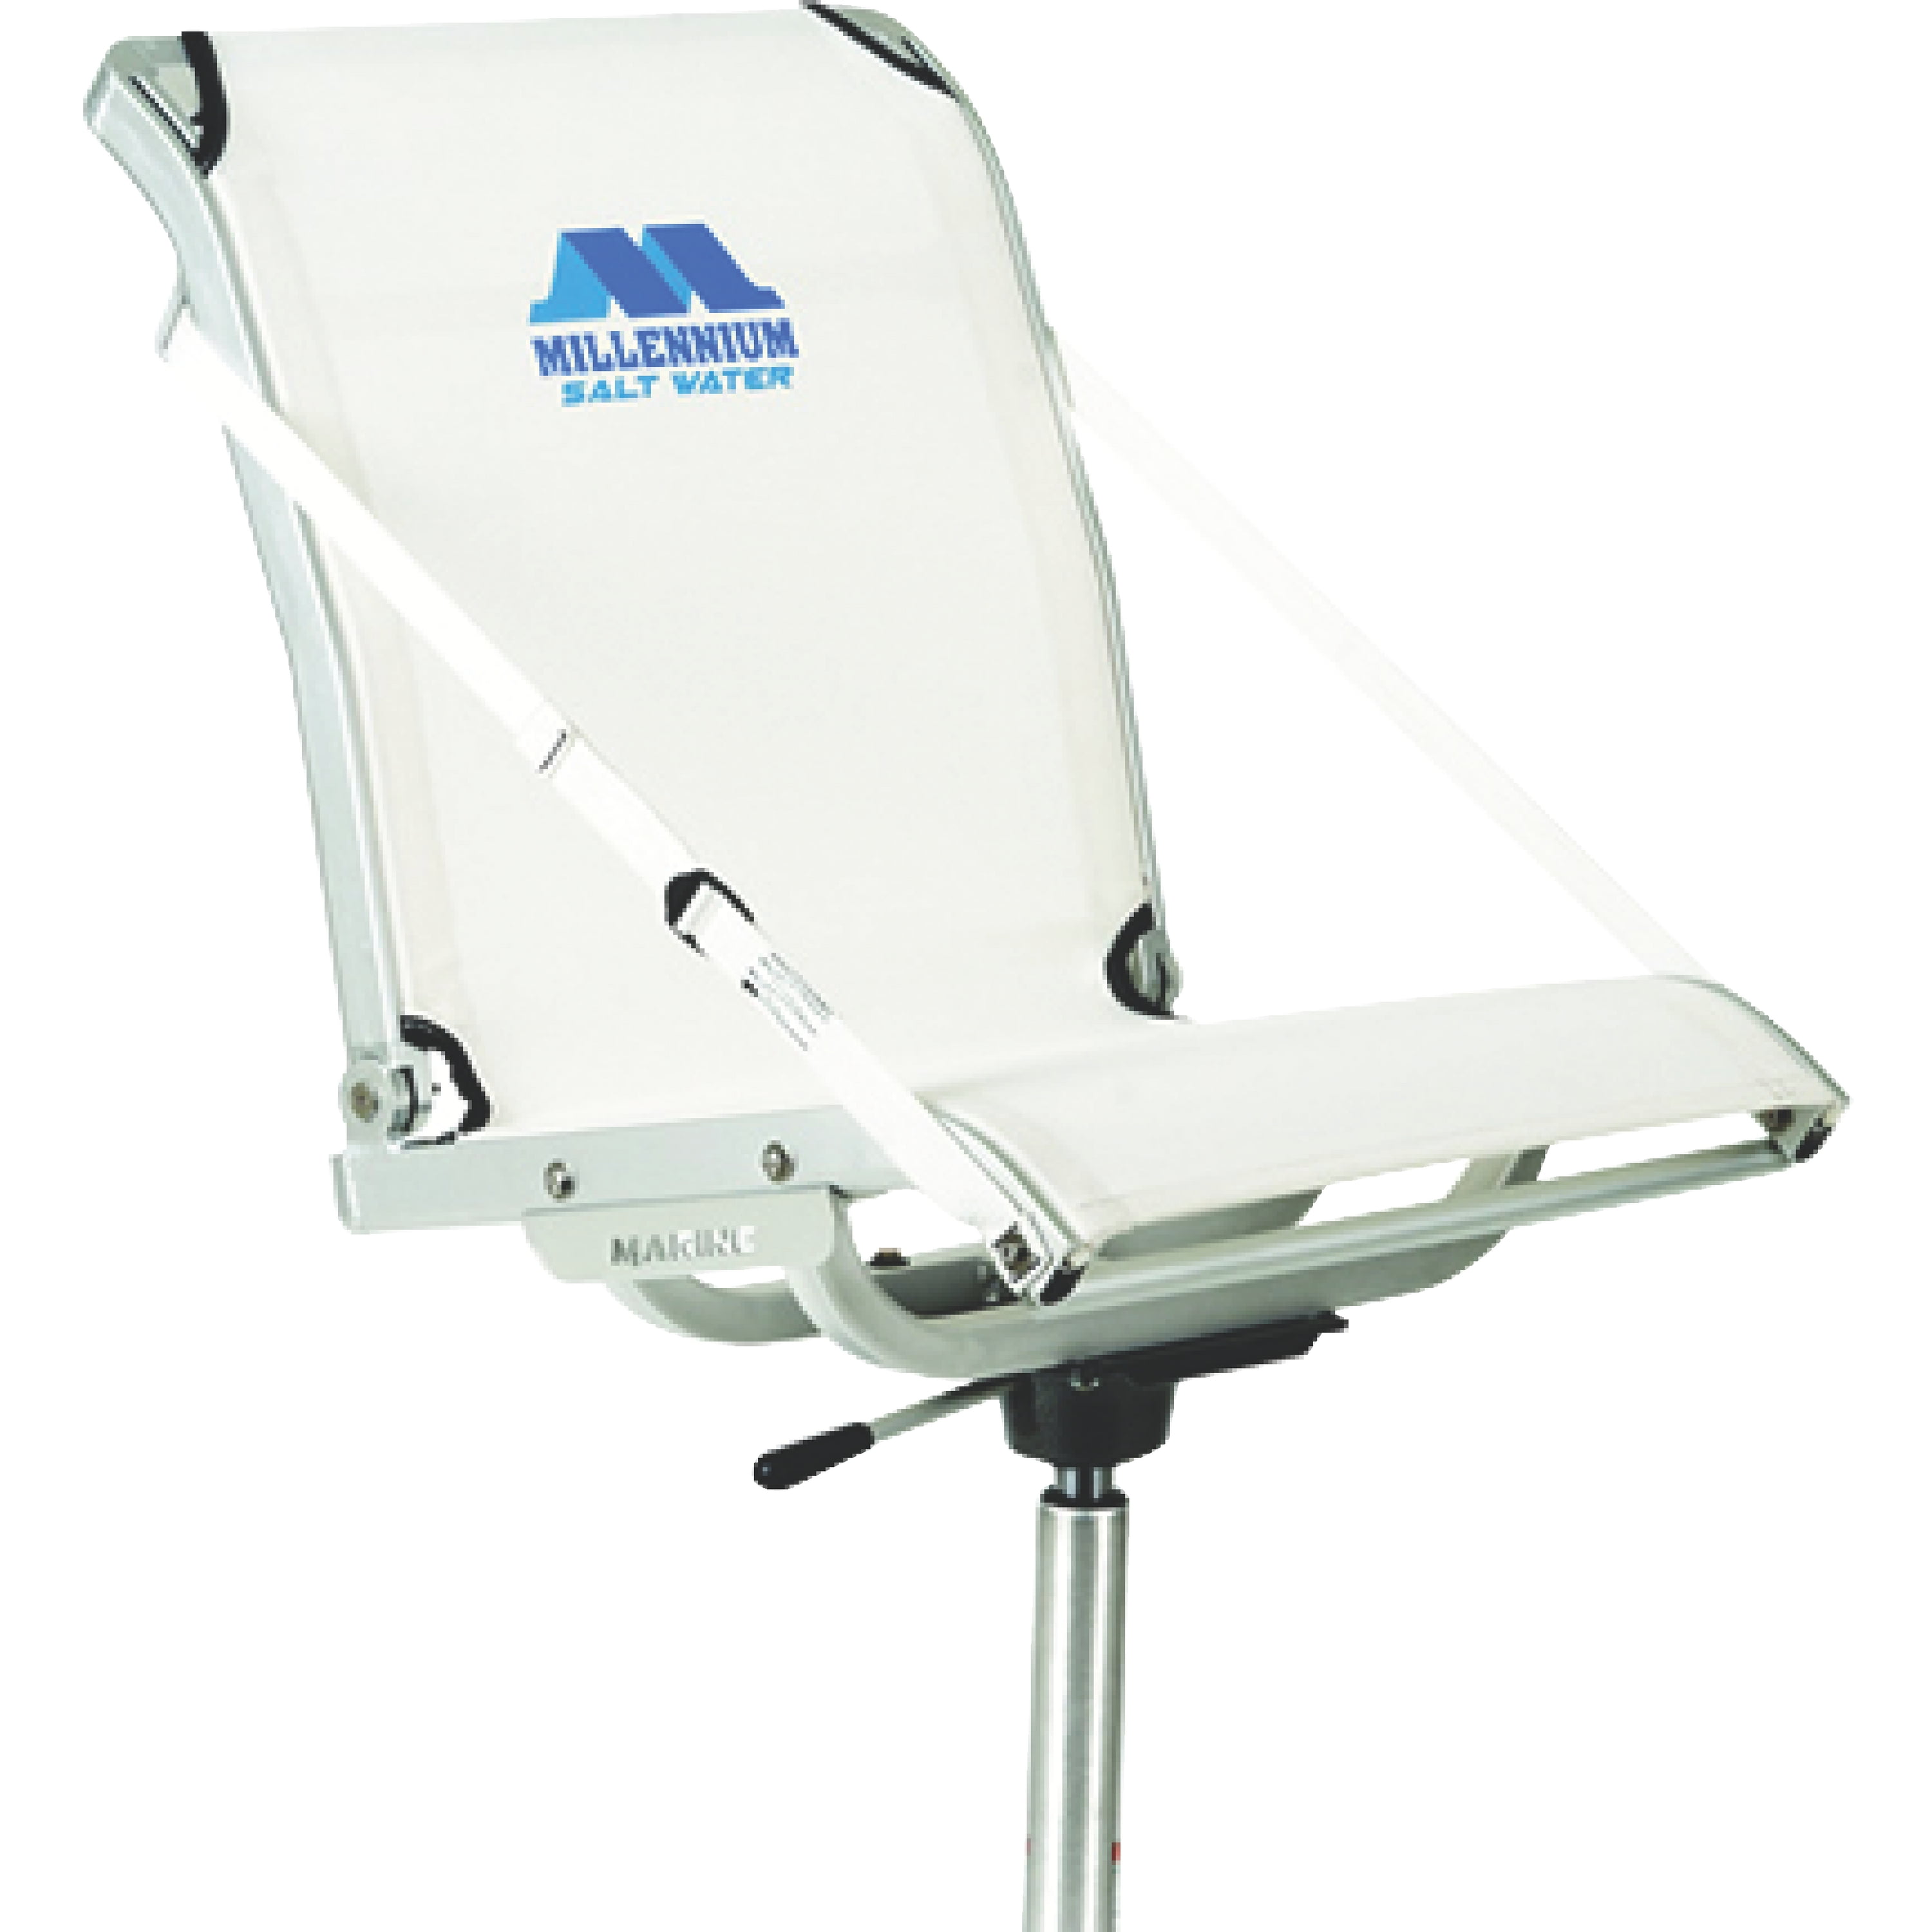 GRIZZLY JIG MILLENNIUM MARINE BOAT SEAT GREY B100GY WITH 1002 SEAT BASE 